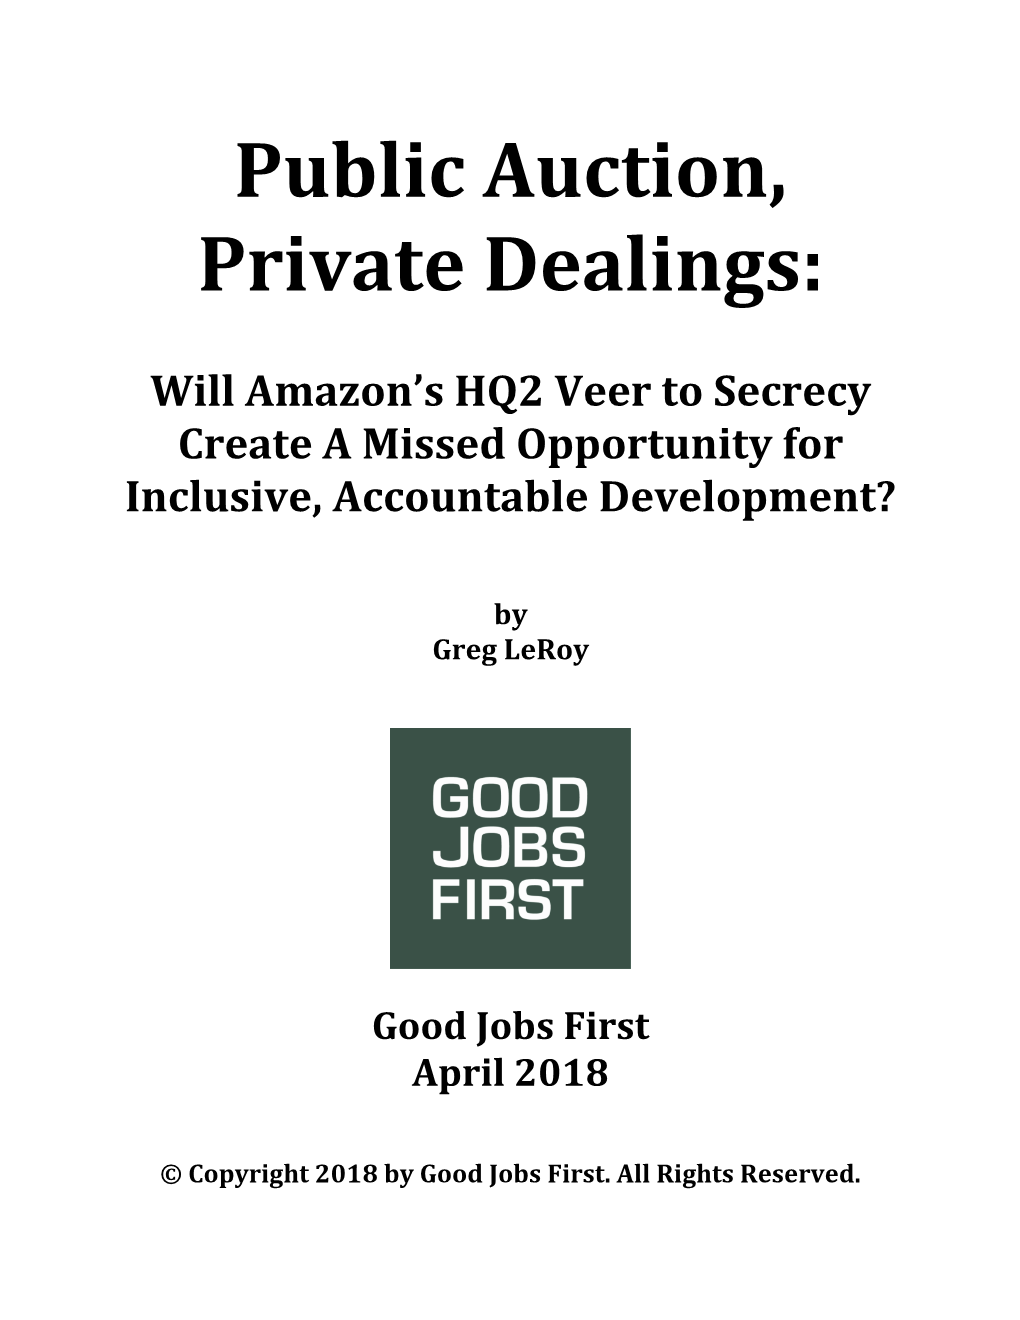 Public Auction, Private Dealings: Will Amazon's HQ2